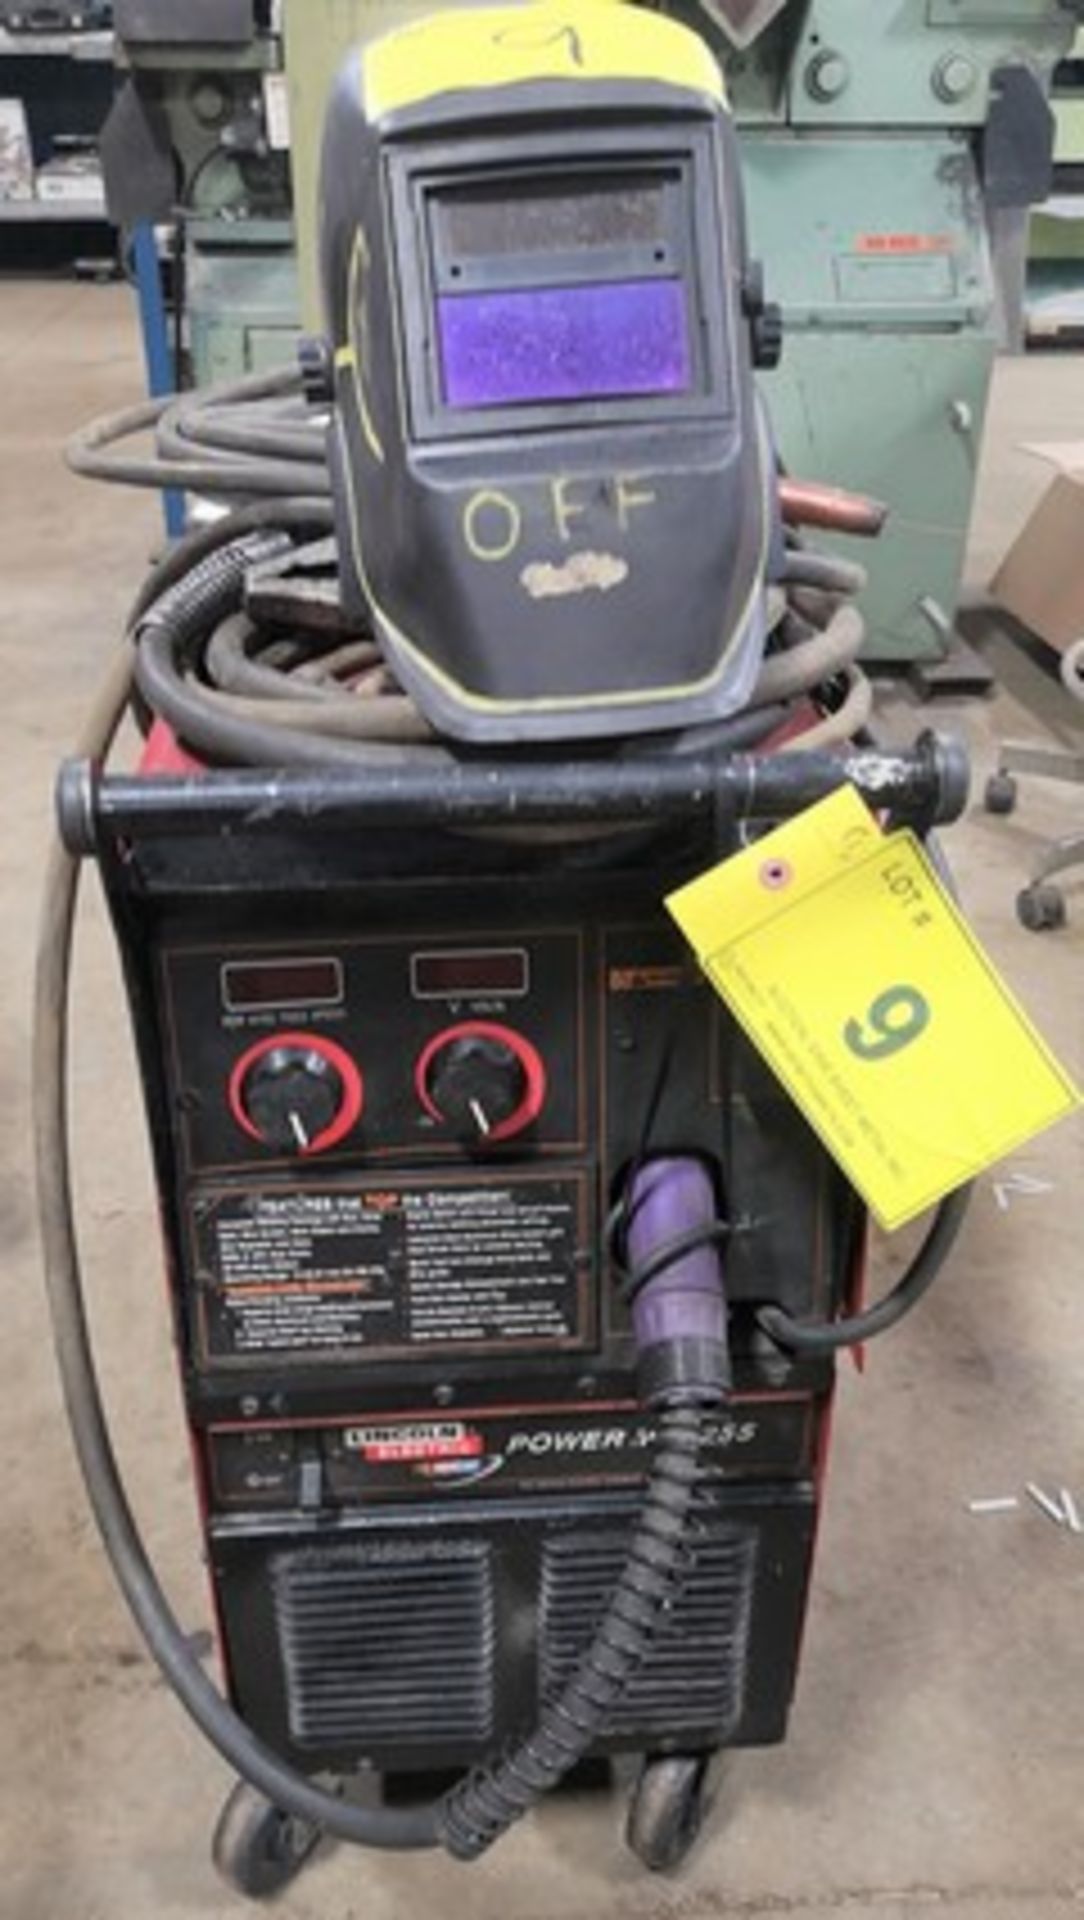 LINCOLN ELECTRIC POWER MIG 255 WELDER, S/N K1693-10986 U1030405834 W/ ANTRA HTH-1800A MASK - Image 3 of 6